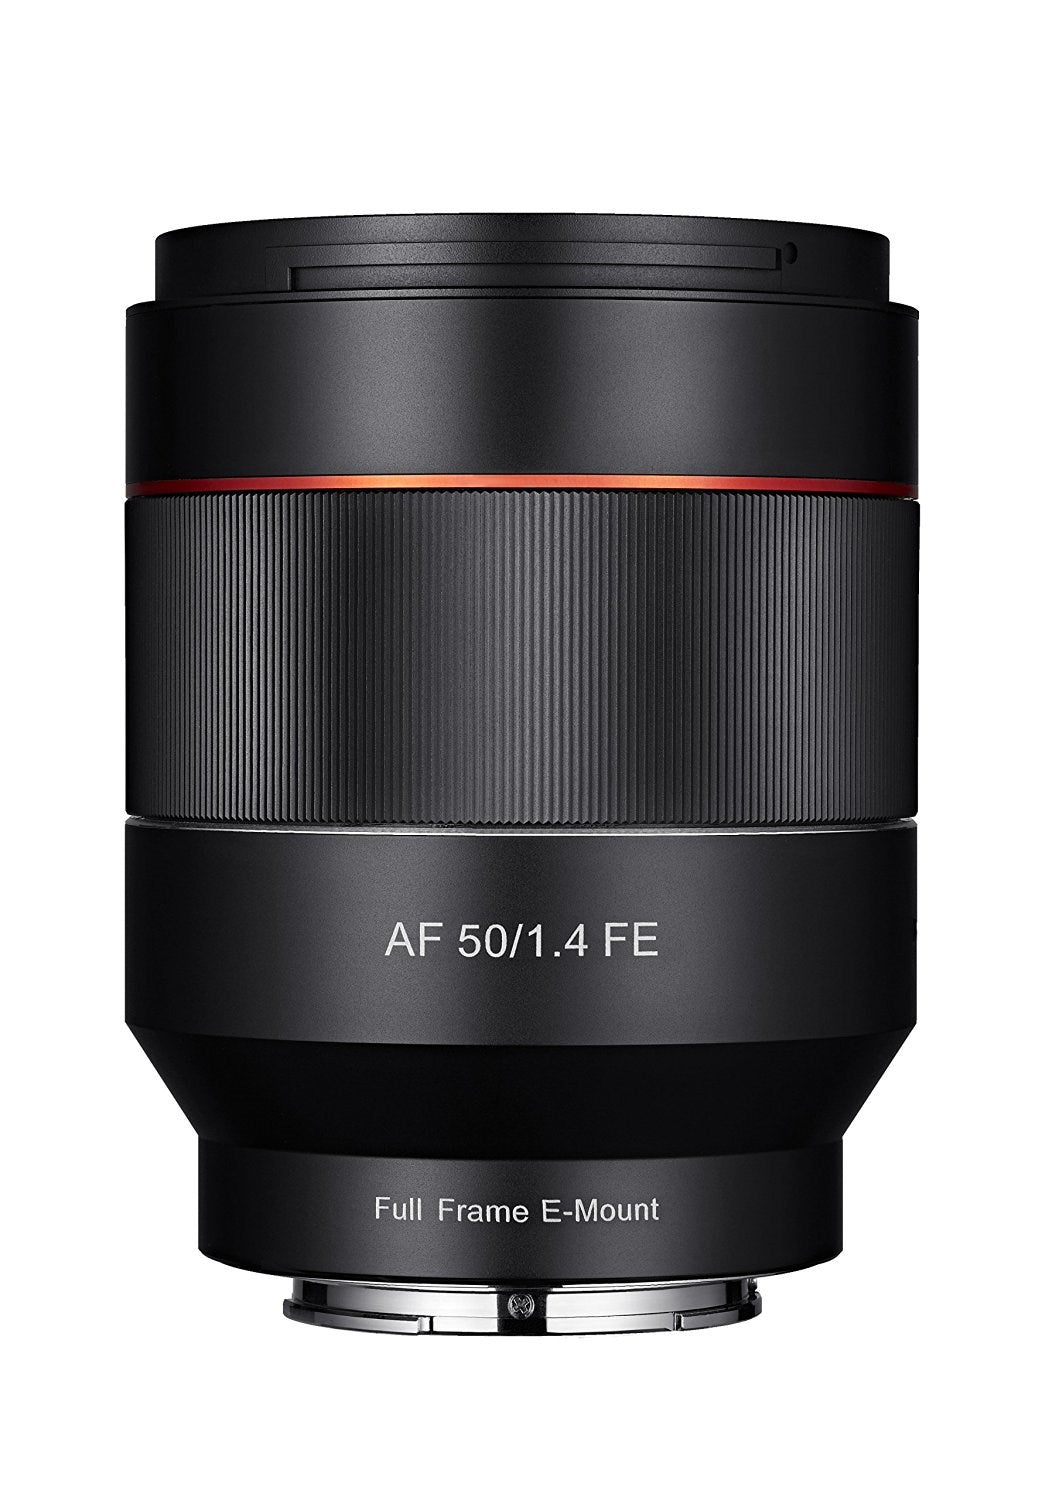 Product Image of Clearance Samyang AF 50mm F1.4 Auto Focus Lens for Sony FE Mount